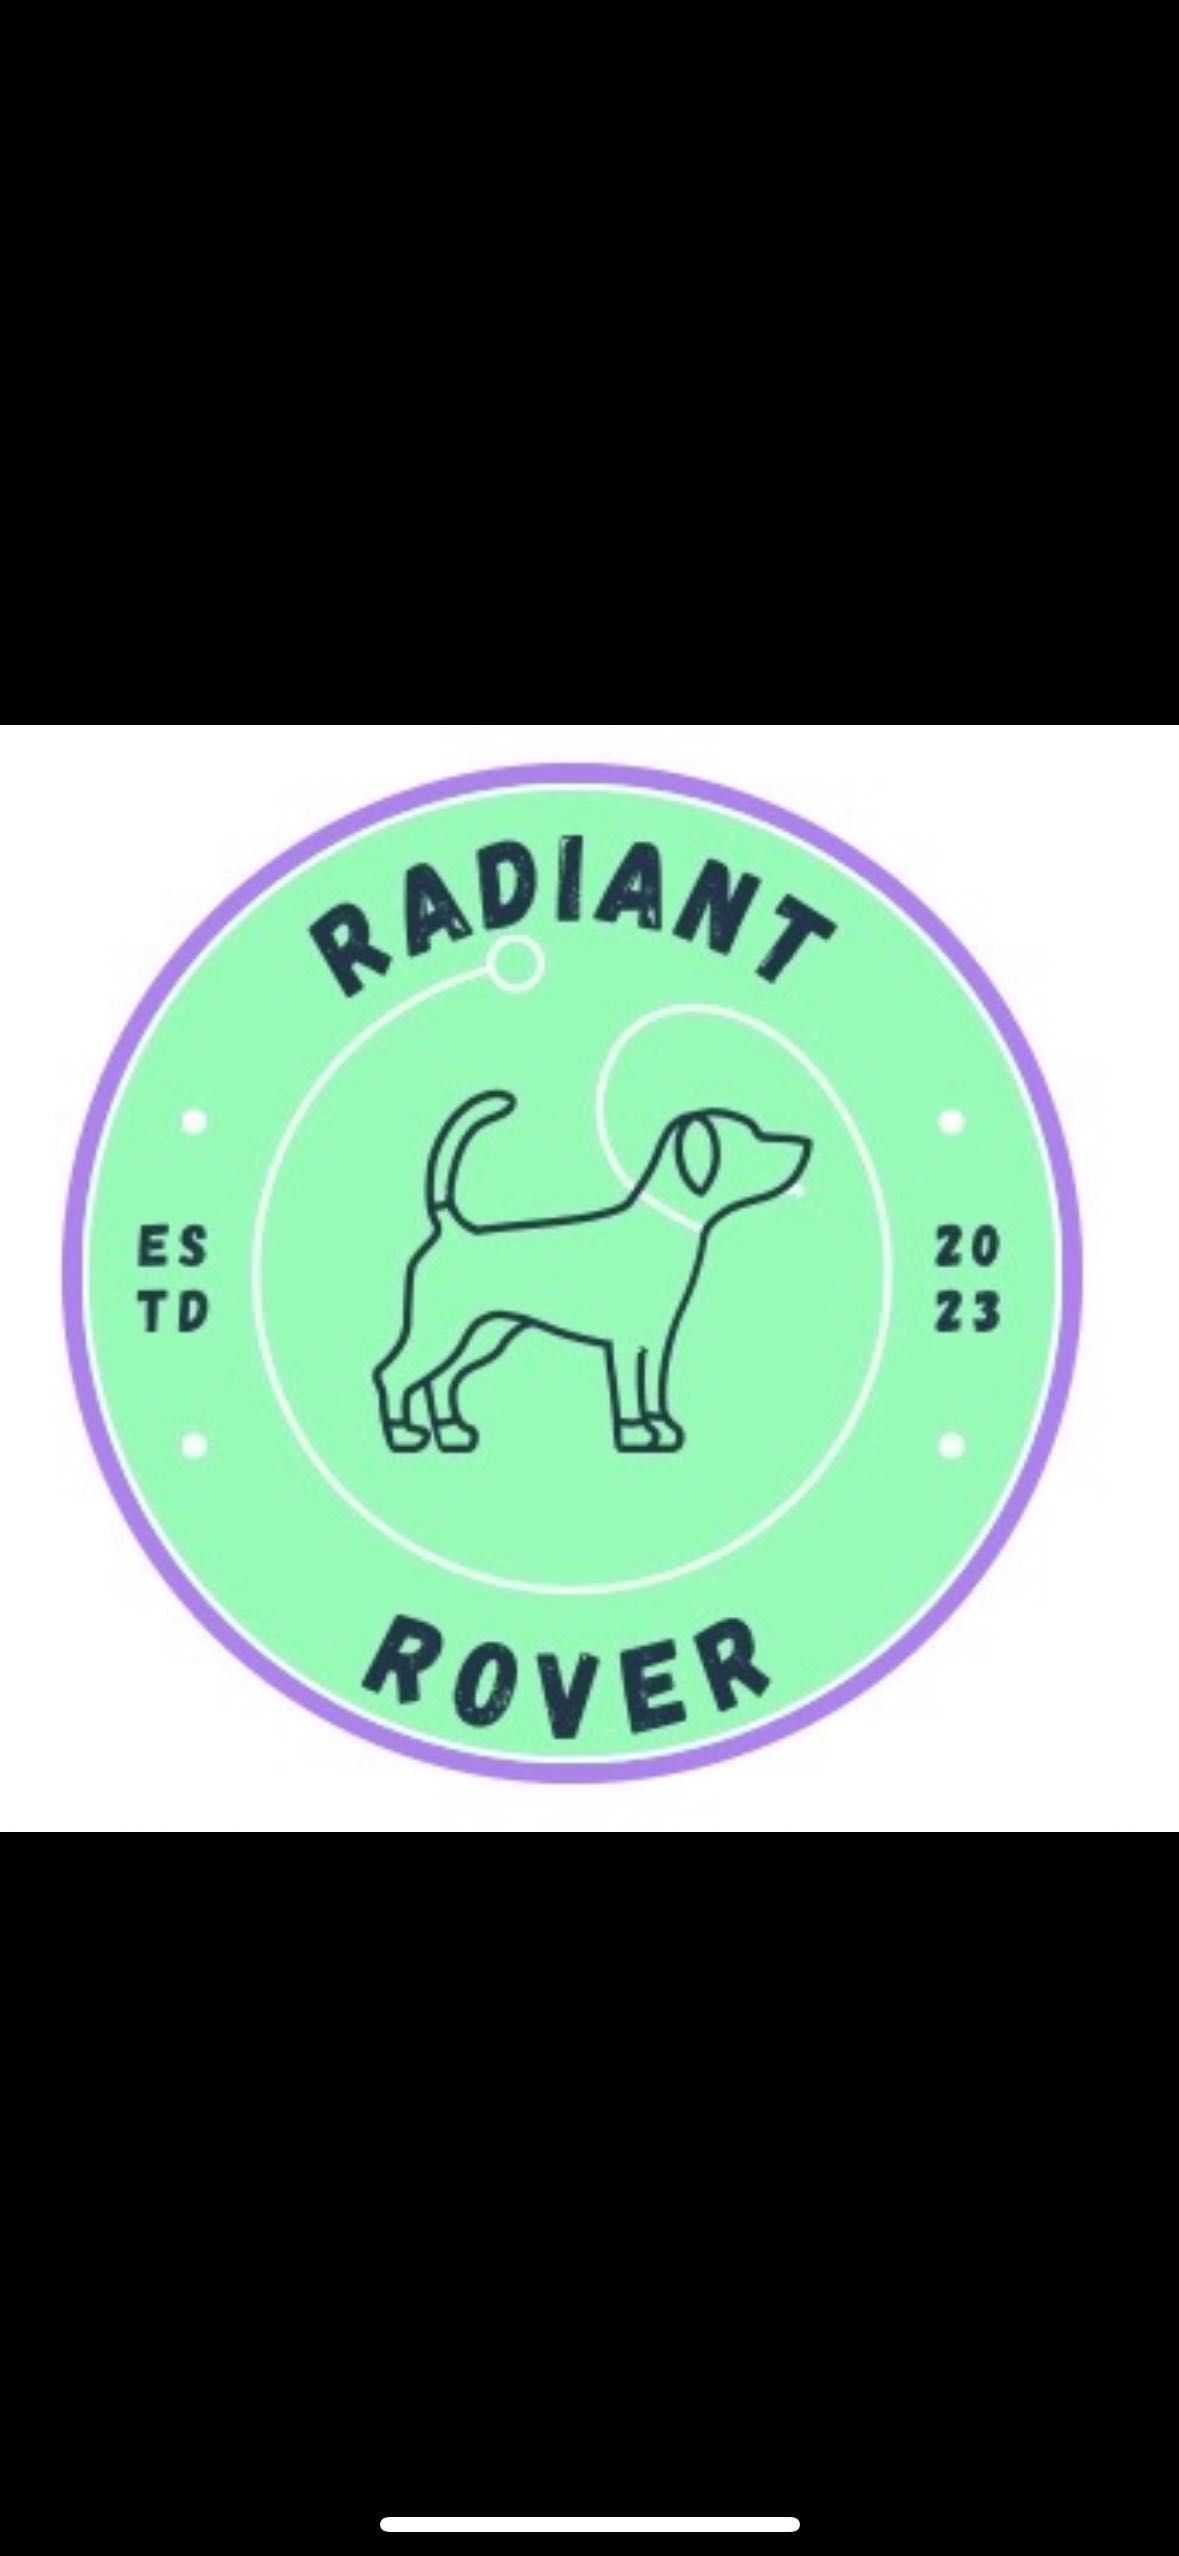 Radiant Rover, Wakefield